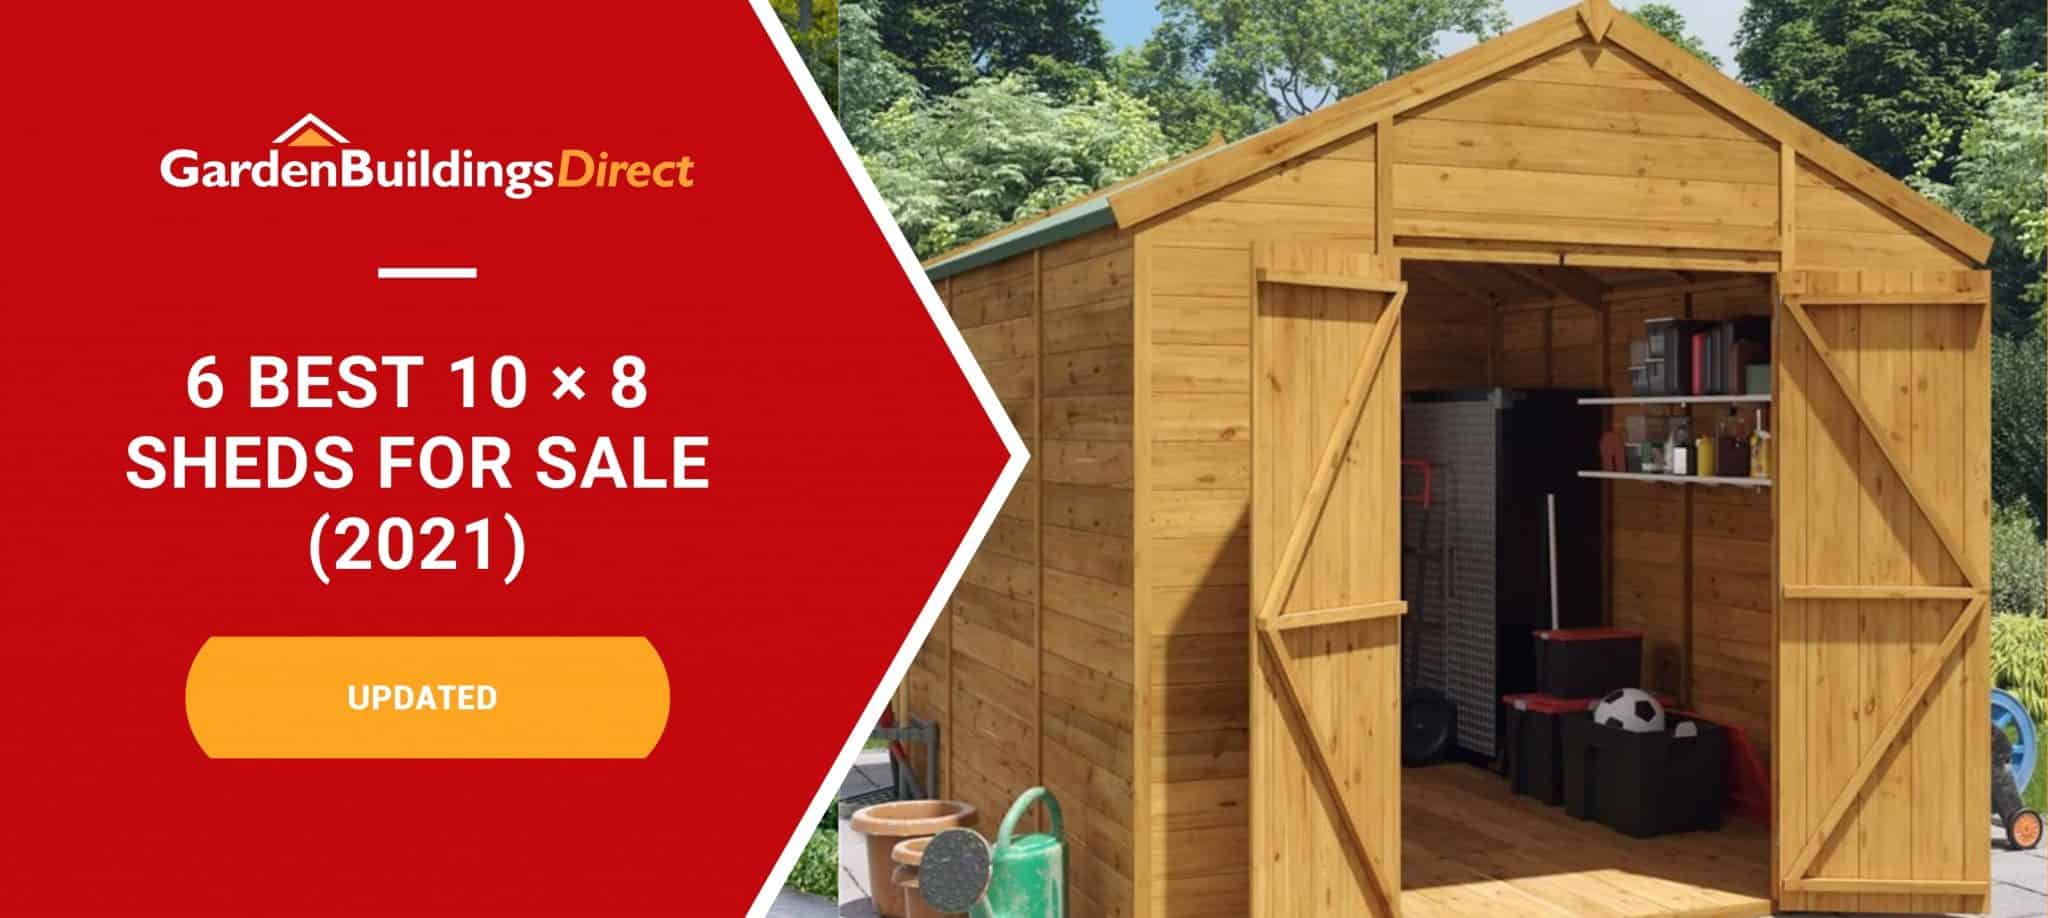 6 best 20 x 8 sheds with a wooden apex roof shed and garden buildings direct logo on a red arrow banner